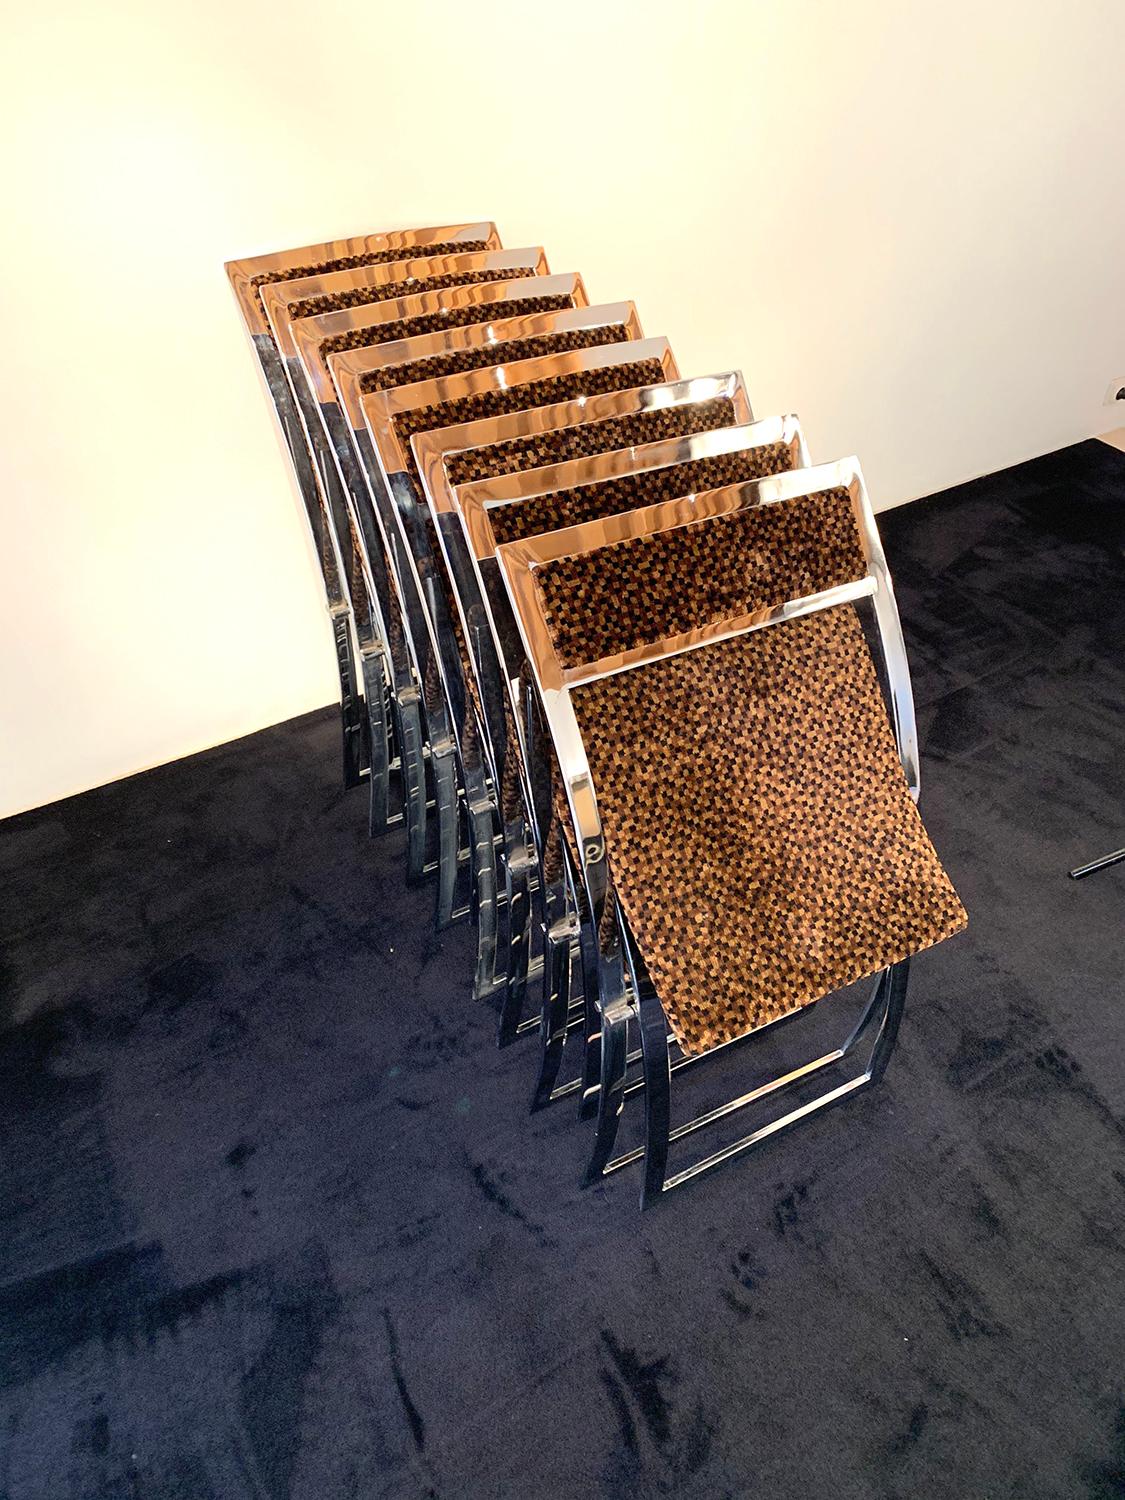 Superb set of folding chairs designed by Marcello Cuneo in 1970 and produced by Mobel. The frame of the chairs is chrome-plated and the seat and back are covered with the original fabric, a velvet in brown tones of high quality.

The chairs are